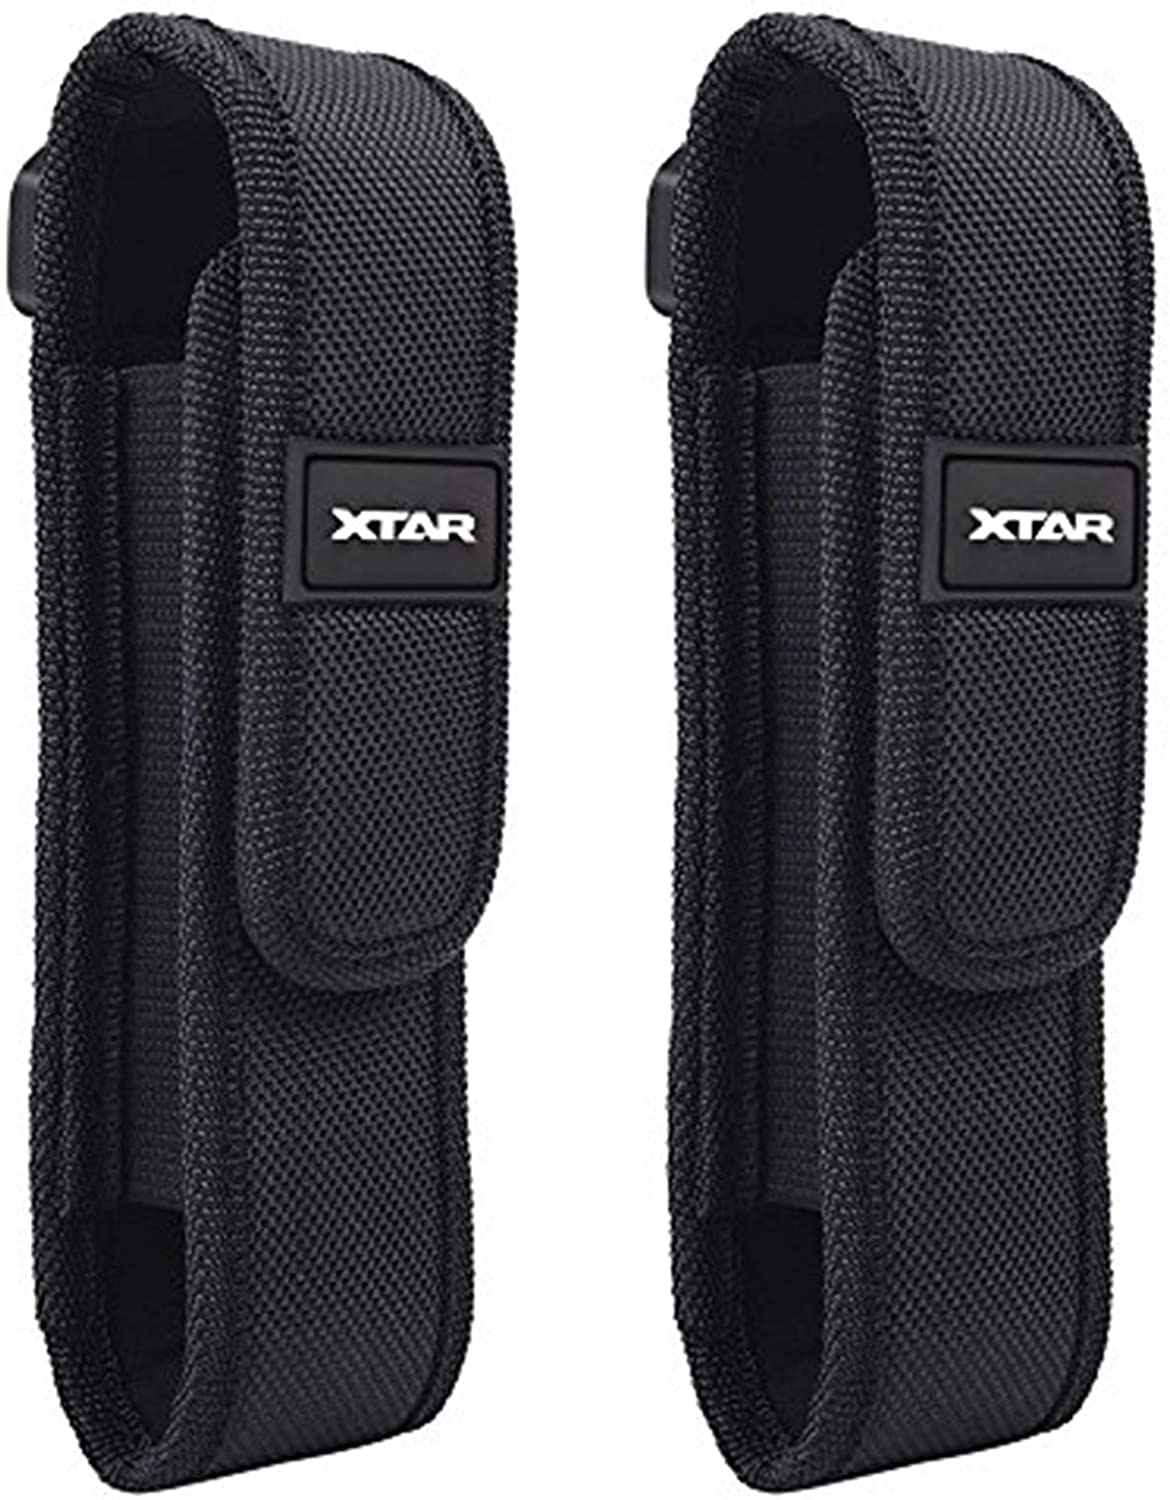 Xtar 2-Pack Flashlight Pouch Holster Holder for 5"-6.5" Flash Light Compatible with Fenix UC30 UC35 E35 Surefire G2X 6P 6PX E2L 501B 